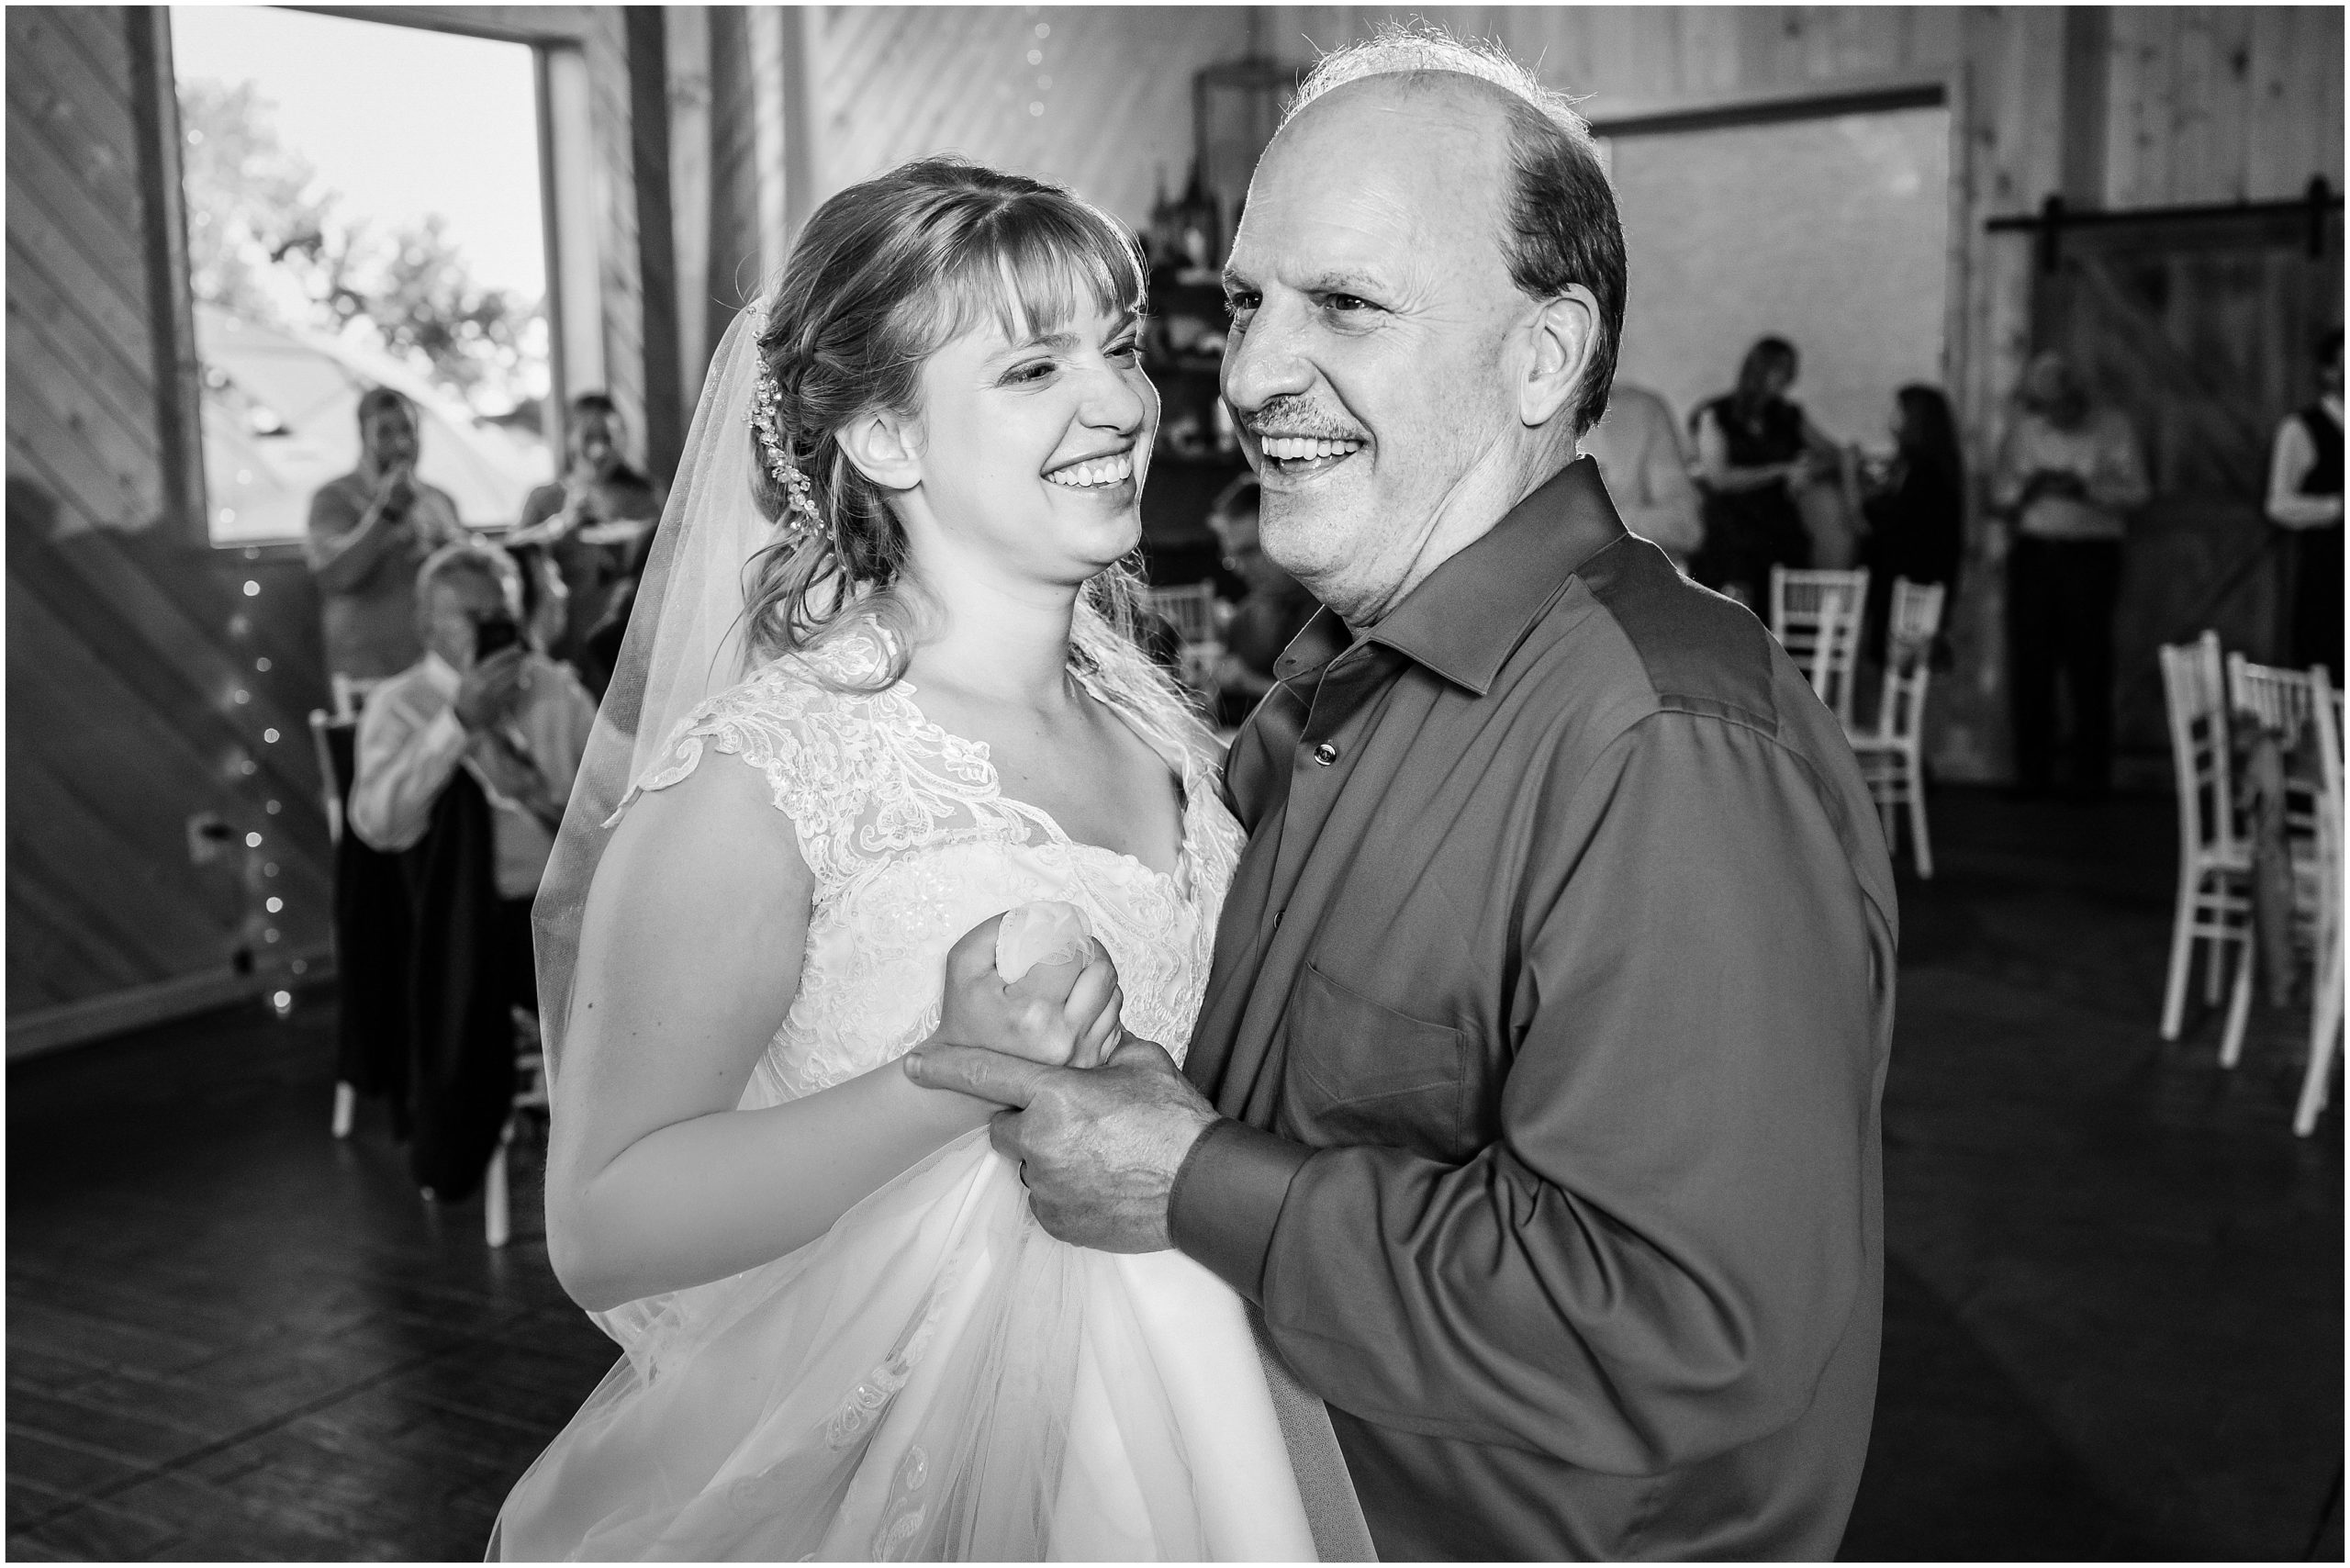 First dance and mother son father daughter dances in a barn | Orchid Inspired Summer Wedding at Oak Hills Utah | Jessie and Dallin Photography